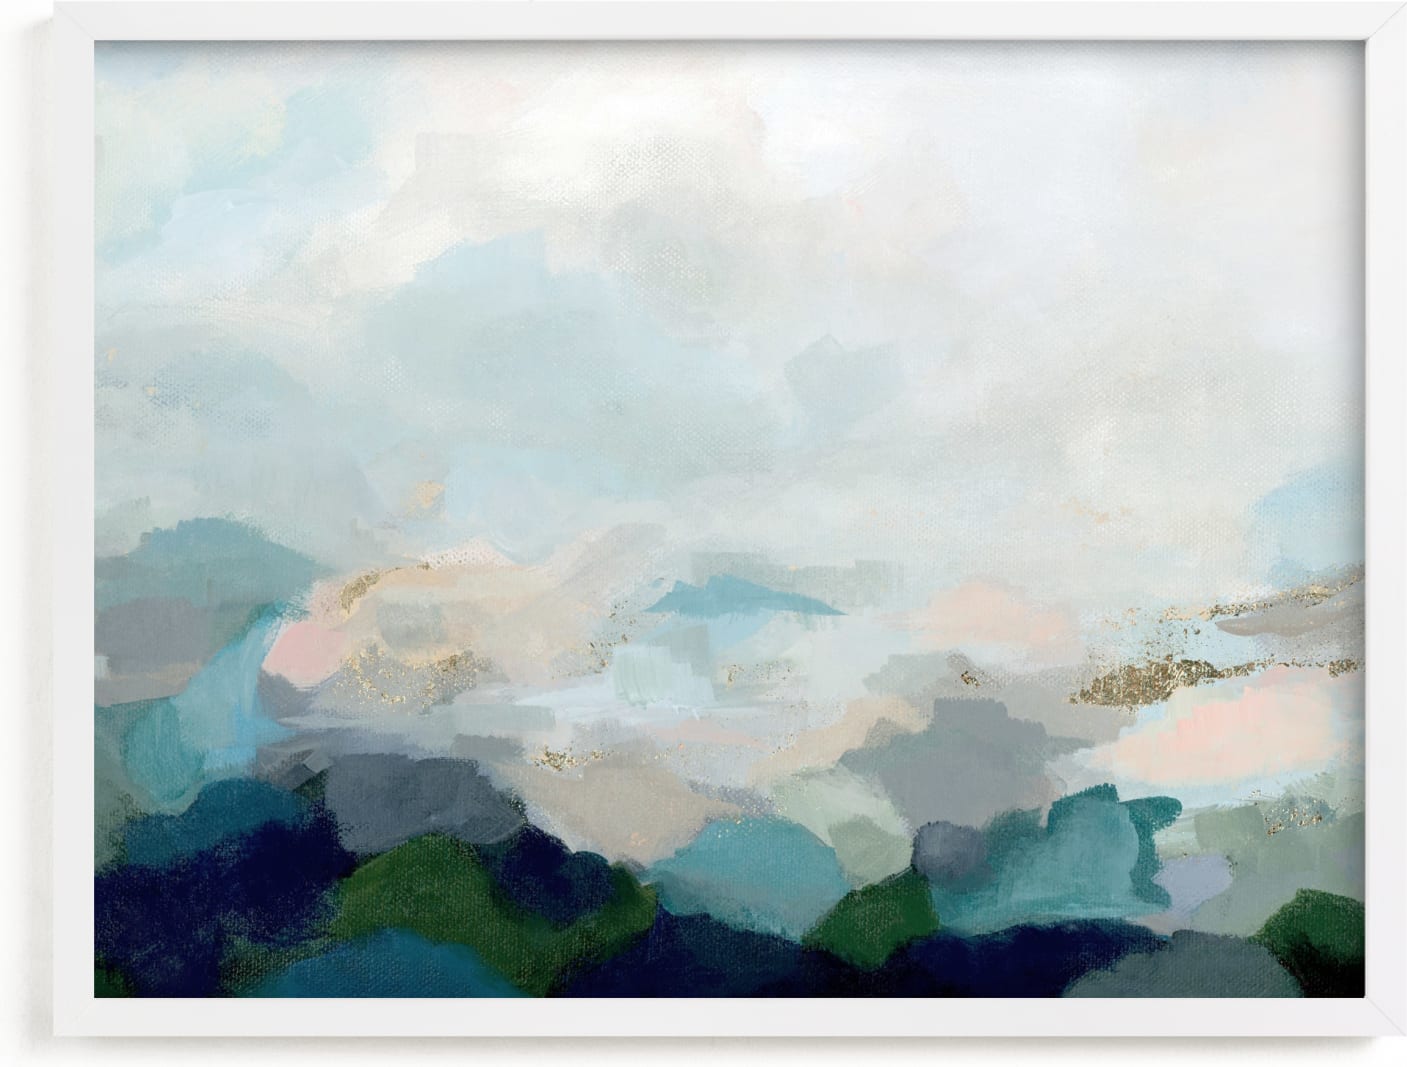 This is a blue art by Nicole Walsh called Lifting Fog.